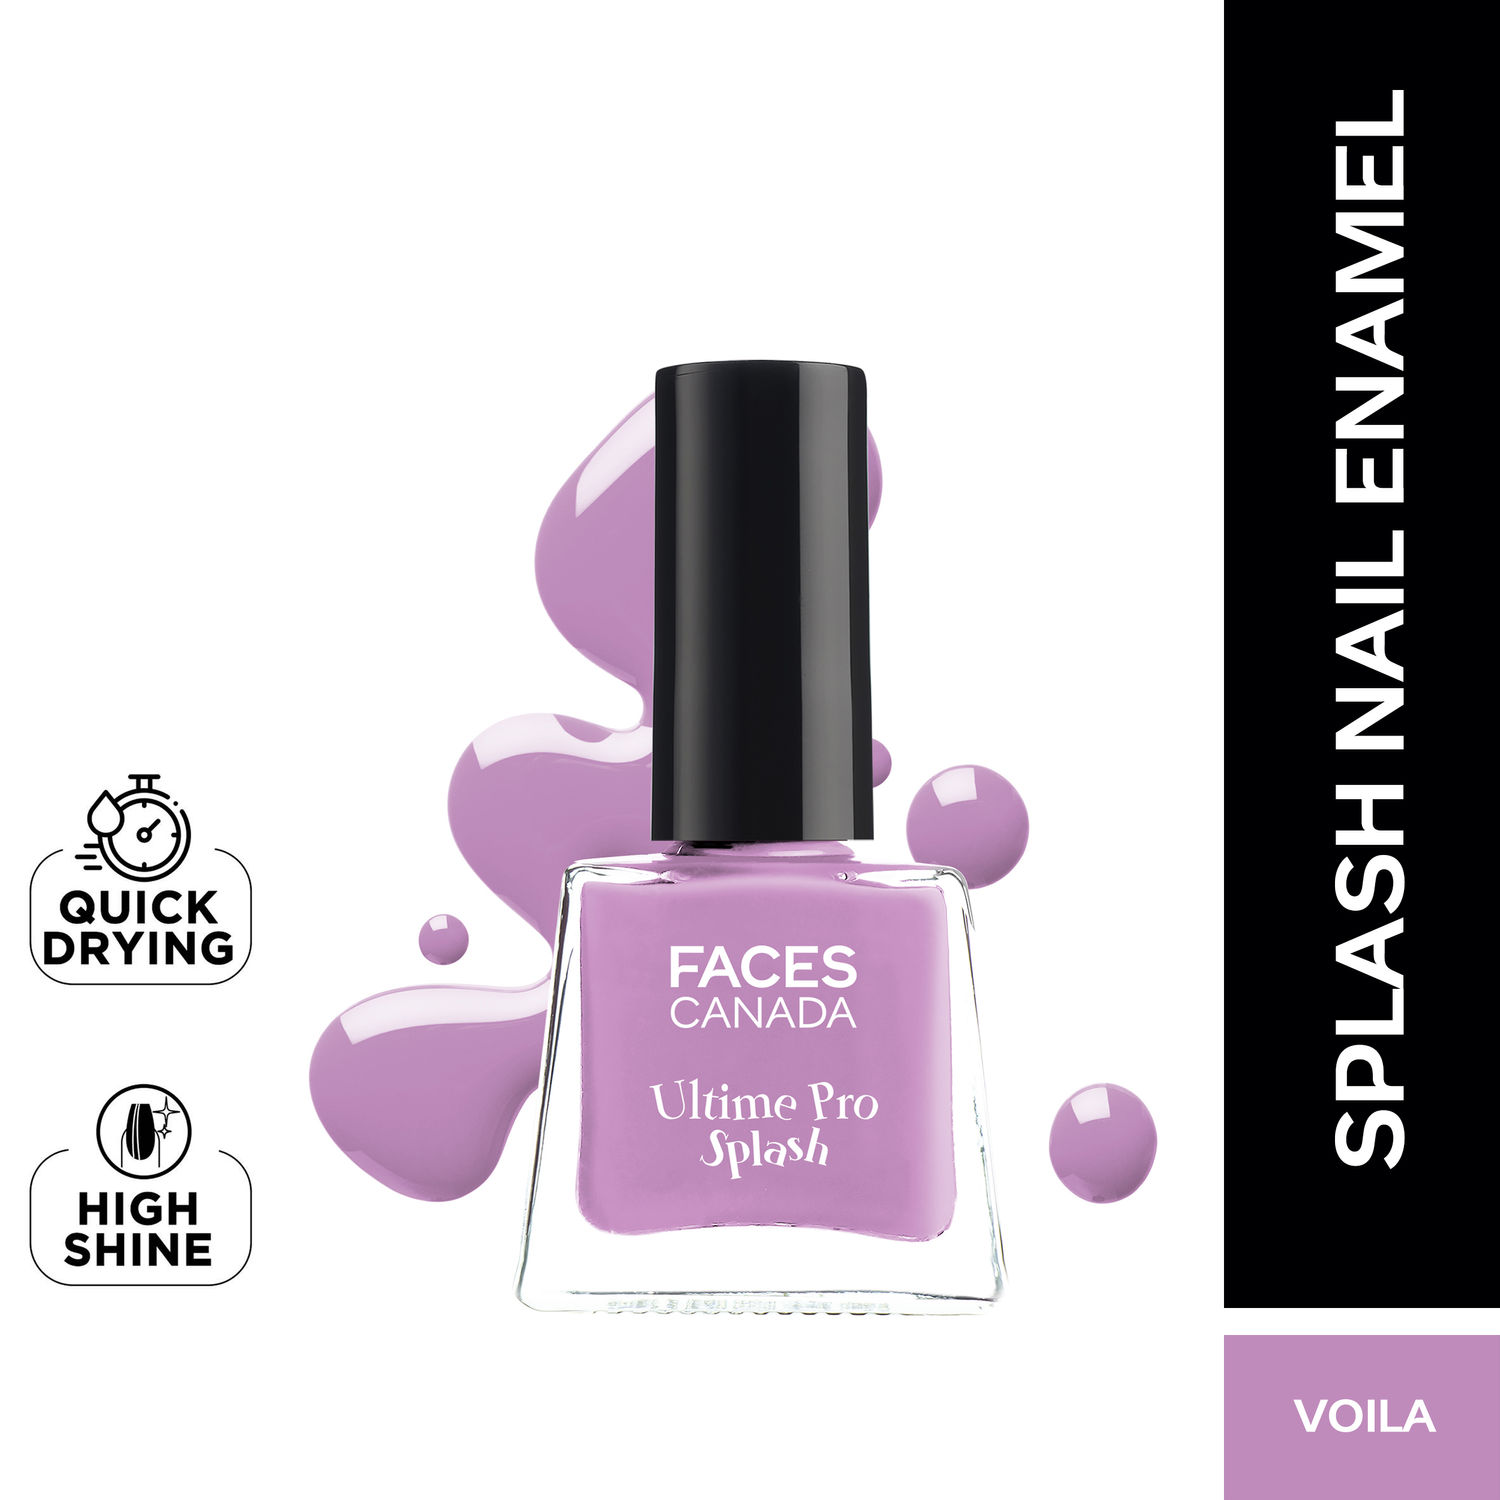 REVIEW AND SWATCHES OF FACES SPLASH NAIL ENAMEL IN SHADE PLUM 207   Nykaa  Network